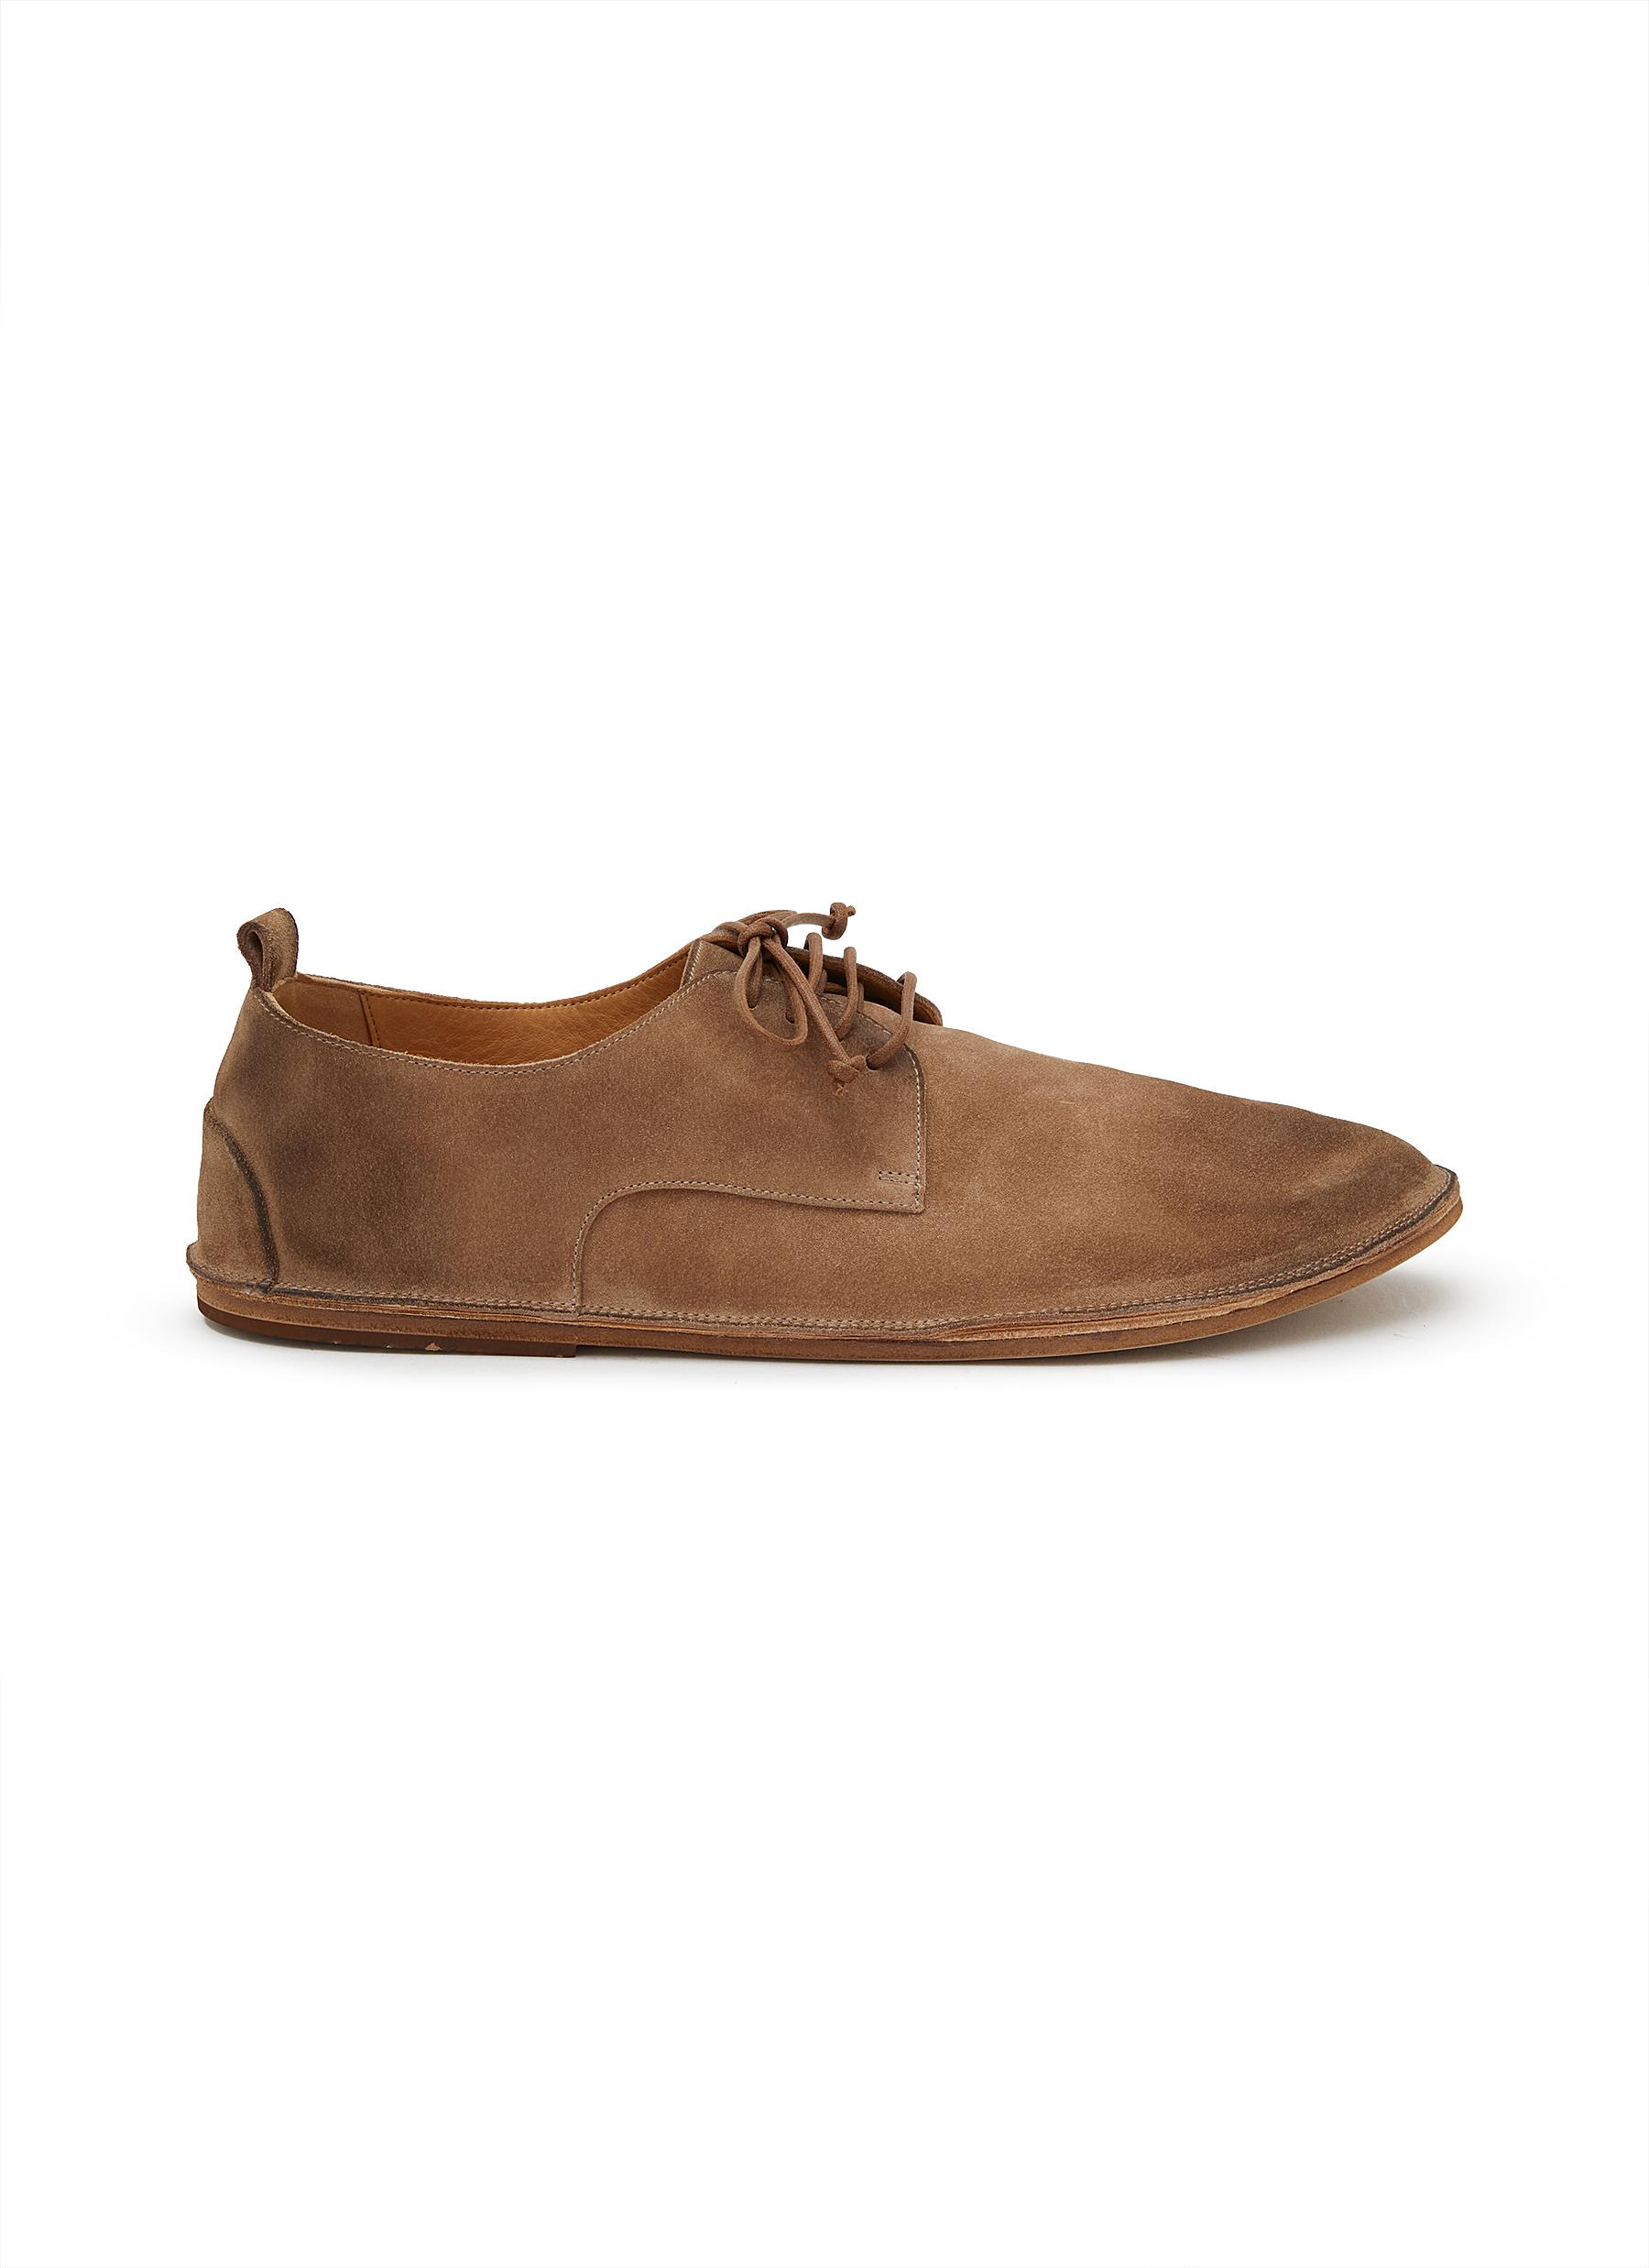 Marsèll leather Derby shoes - Brown